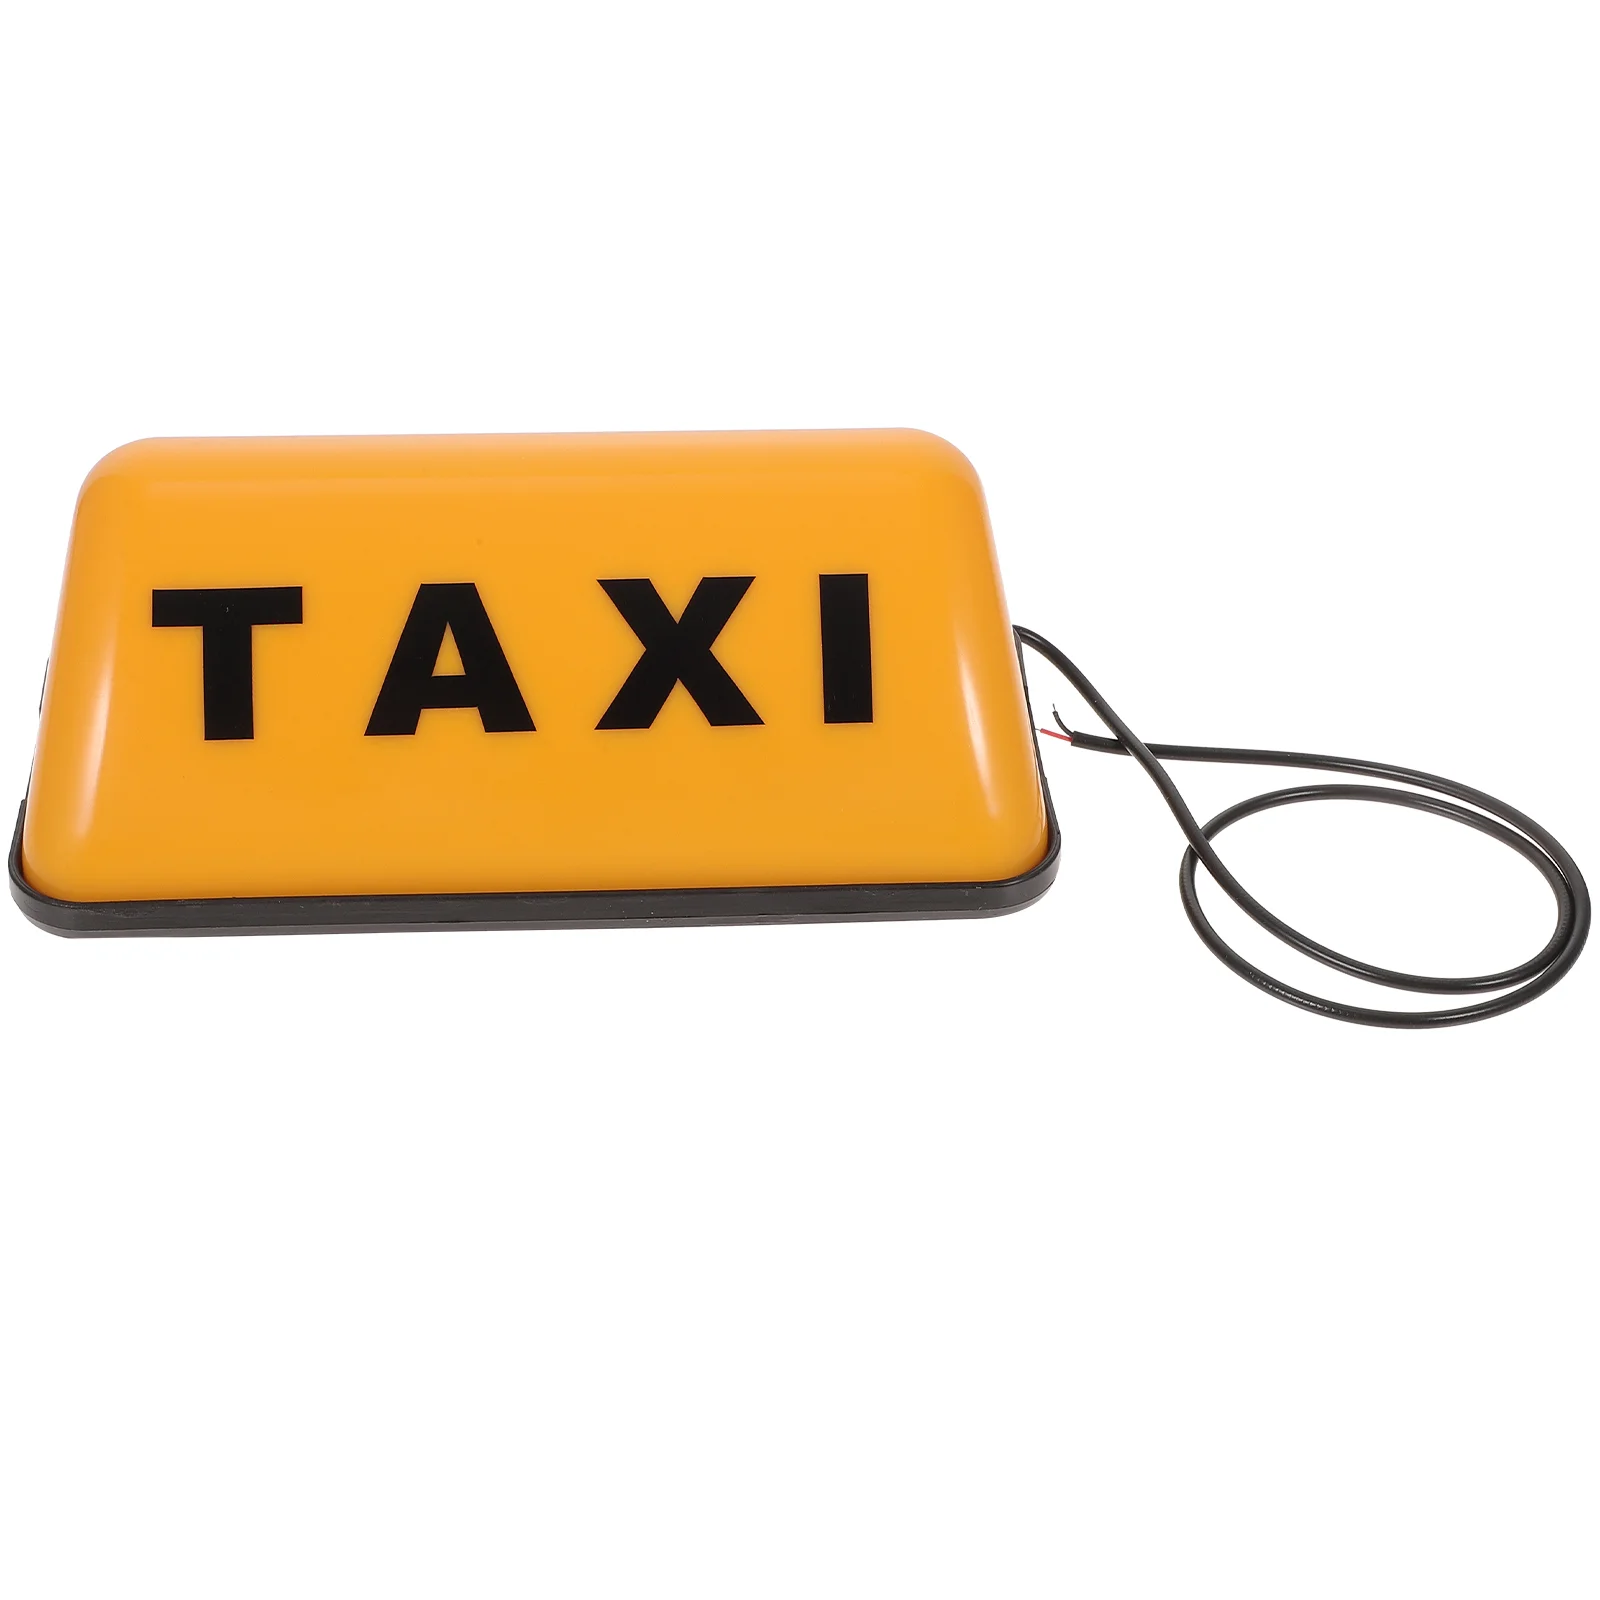 

Taxi Roof Illuminated Sign 12v Taxi Sign Cab Light Taxi Sign Lamp Decor Taxi Roof Lamp Retro TAXI Sign Lamp